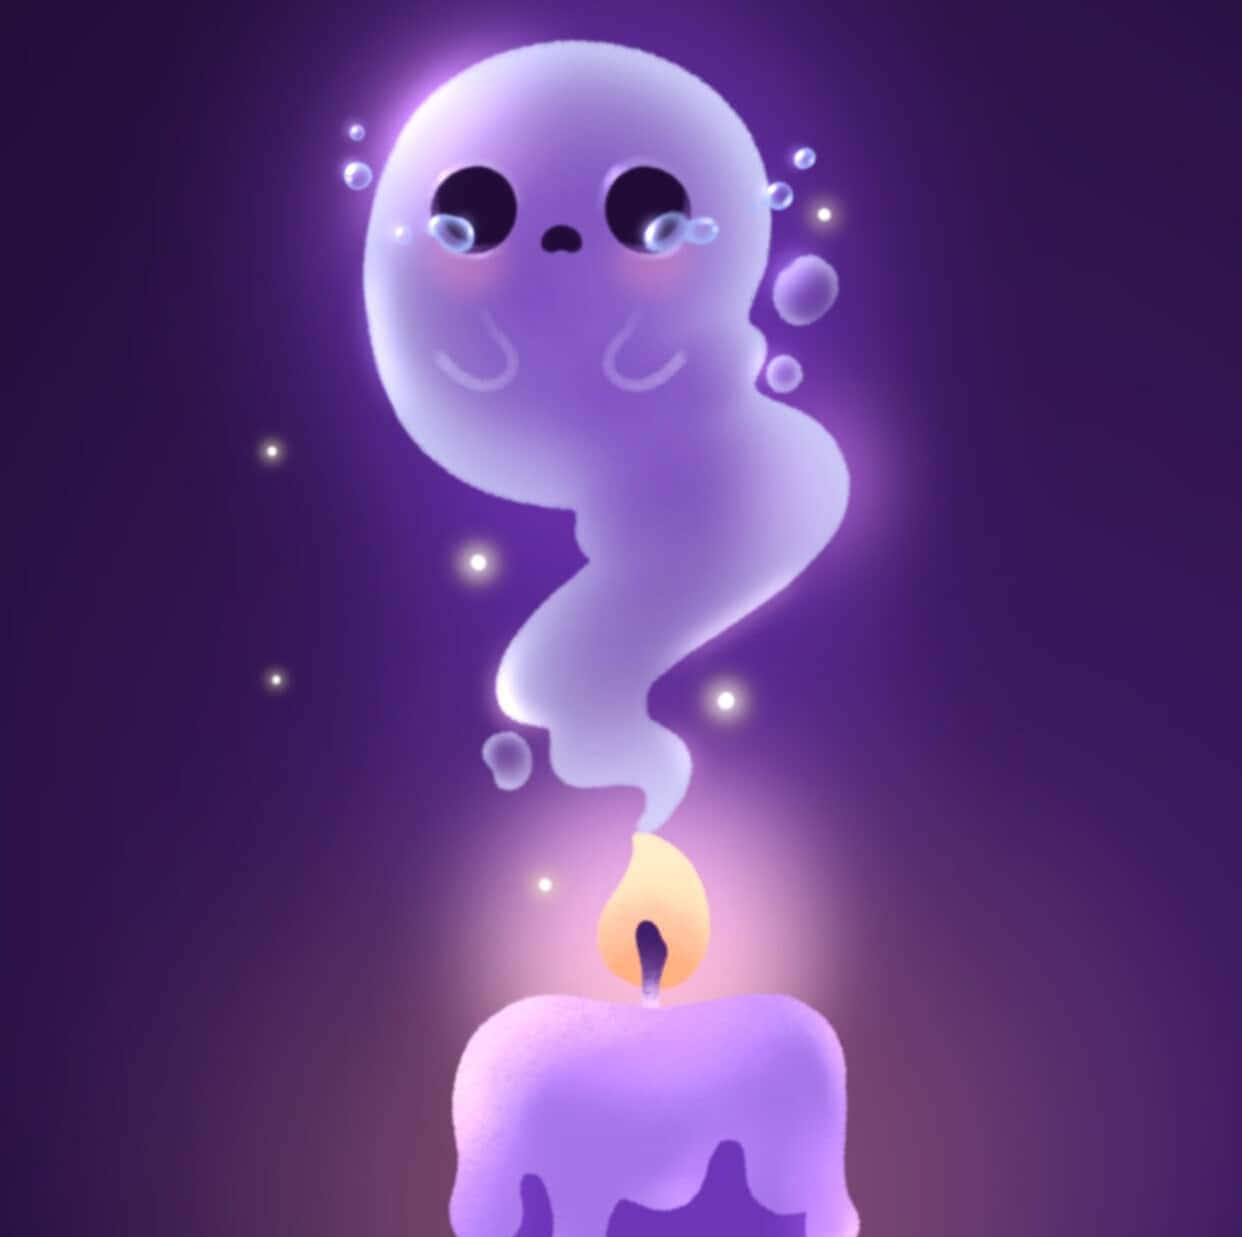 Pastel Ghost Candle Illustration Wallpaper